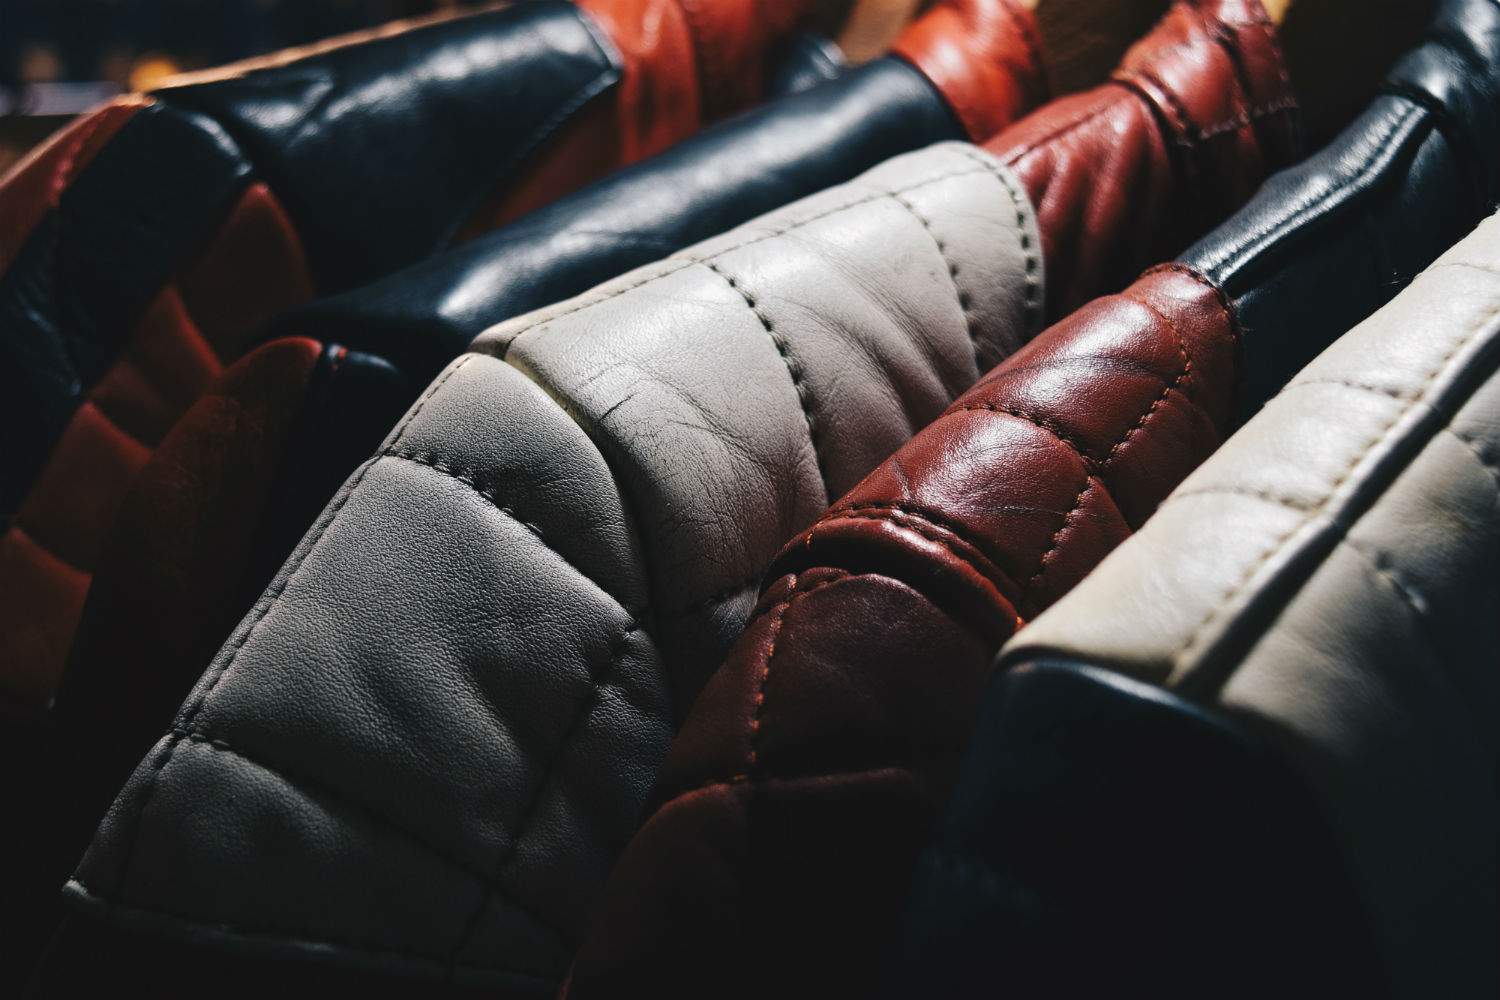 Is 'vegan leather' a sustainable alternative to animal leather? - ABC News